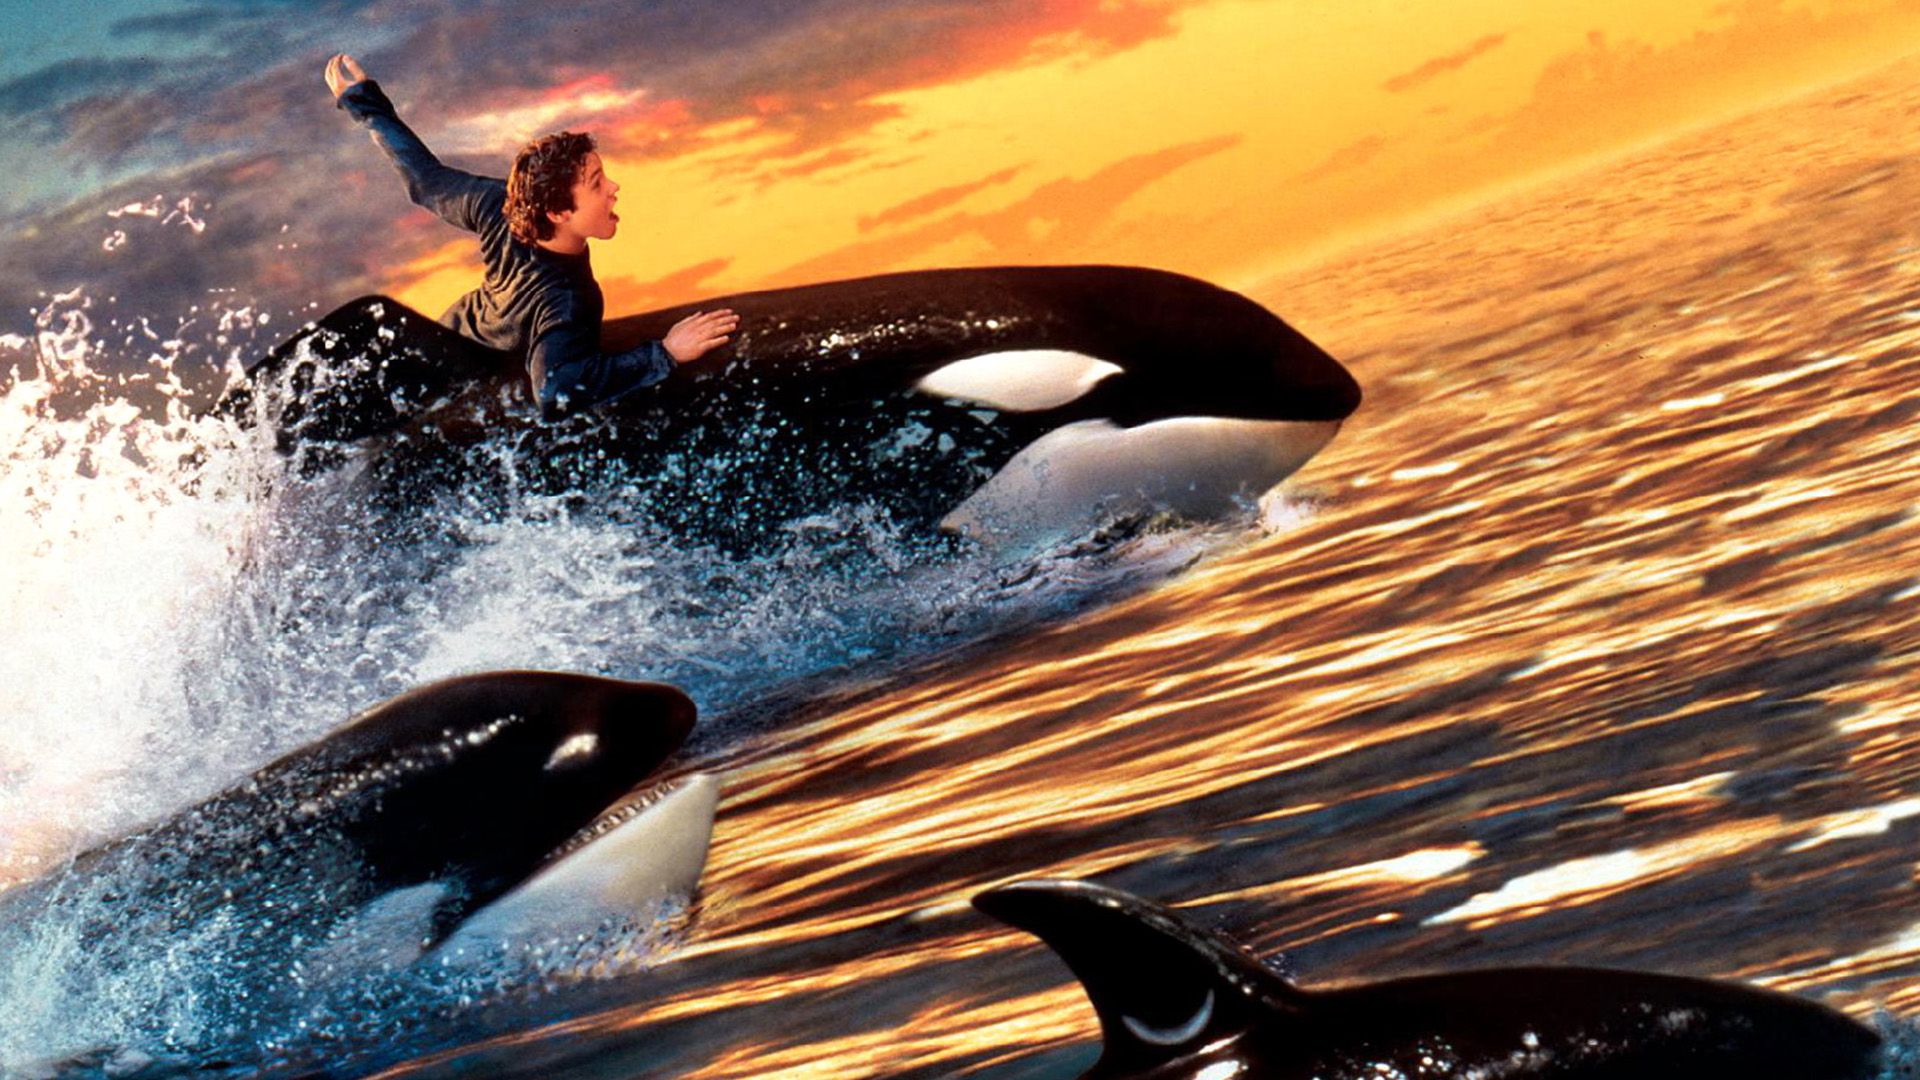 Free Willy 2: The Adventure Home background